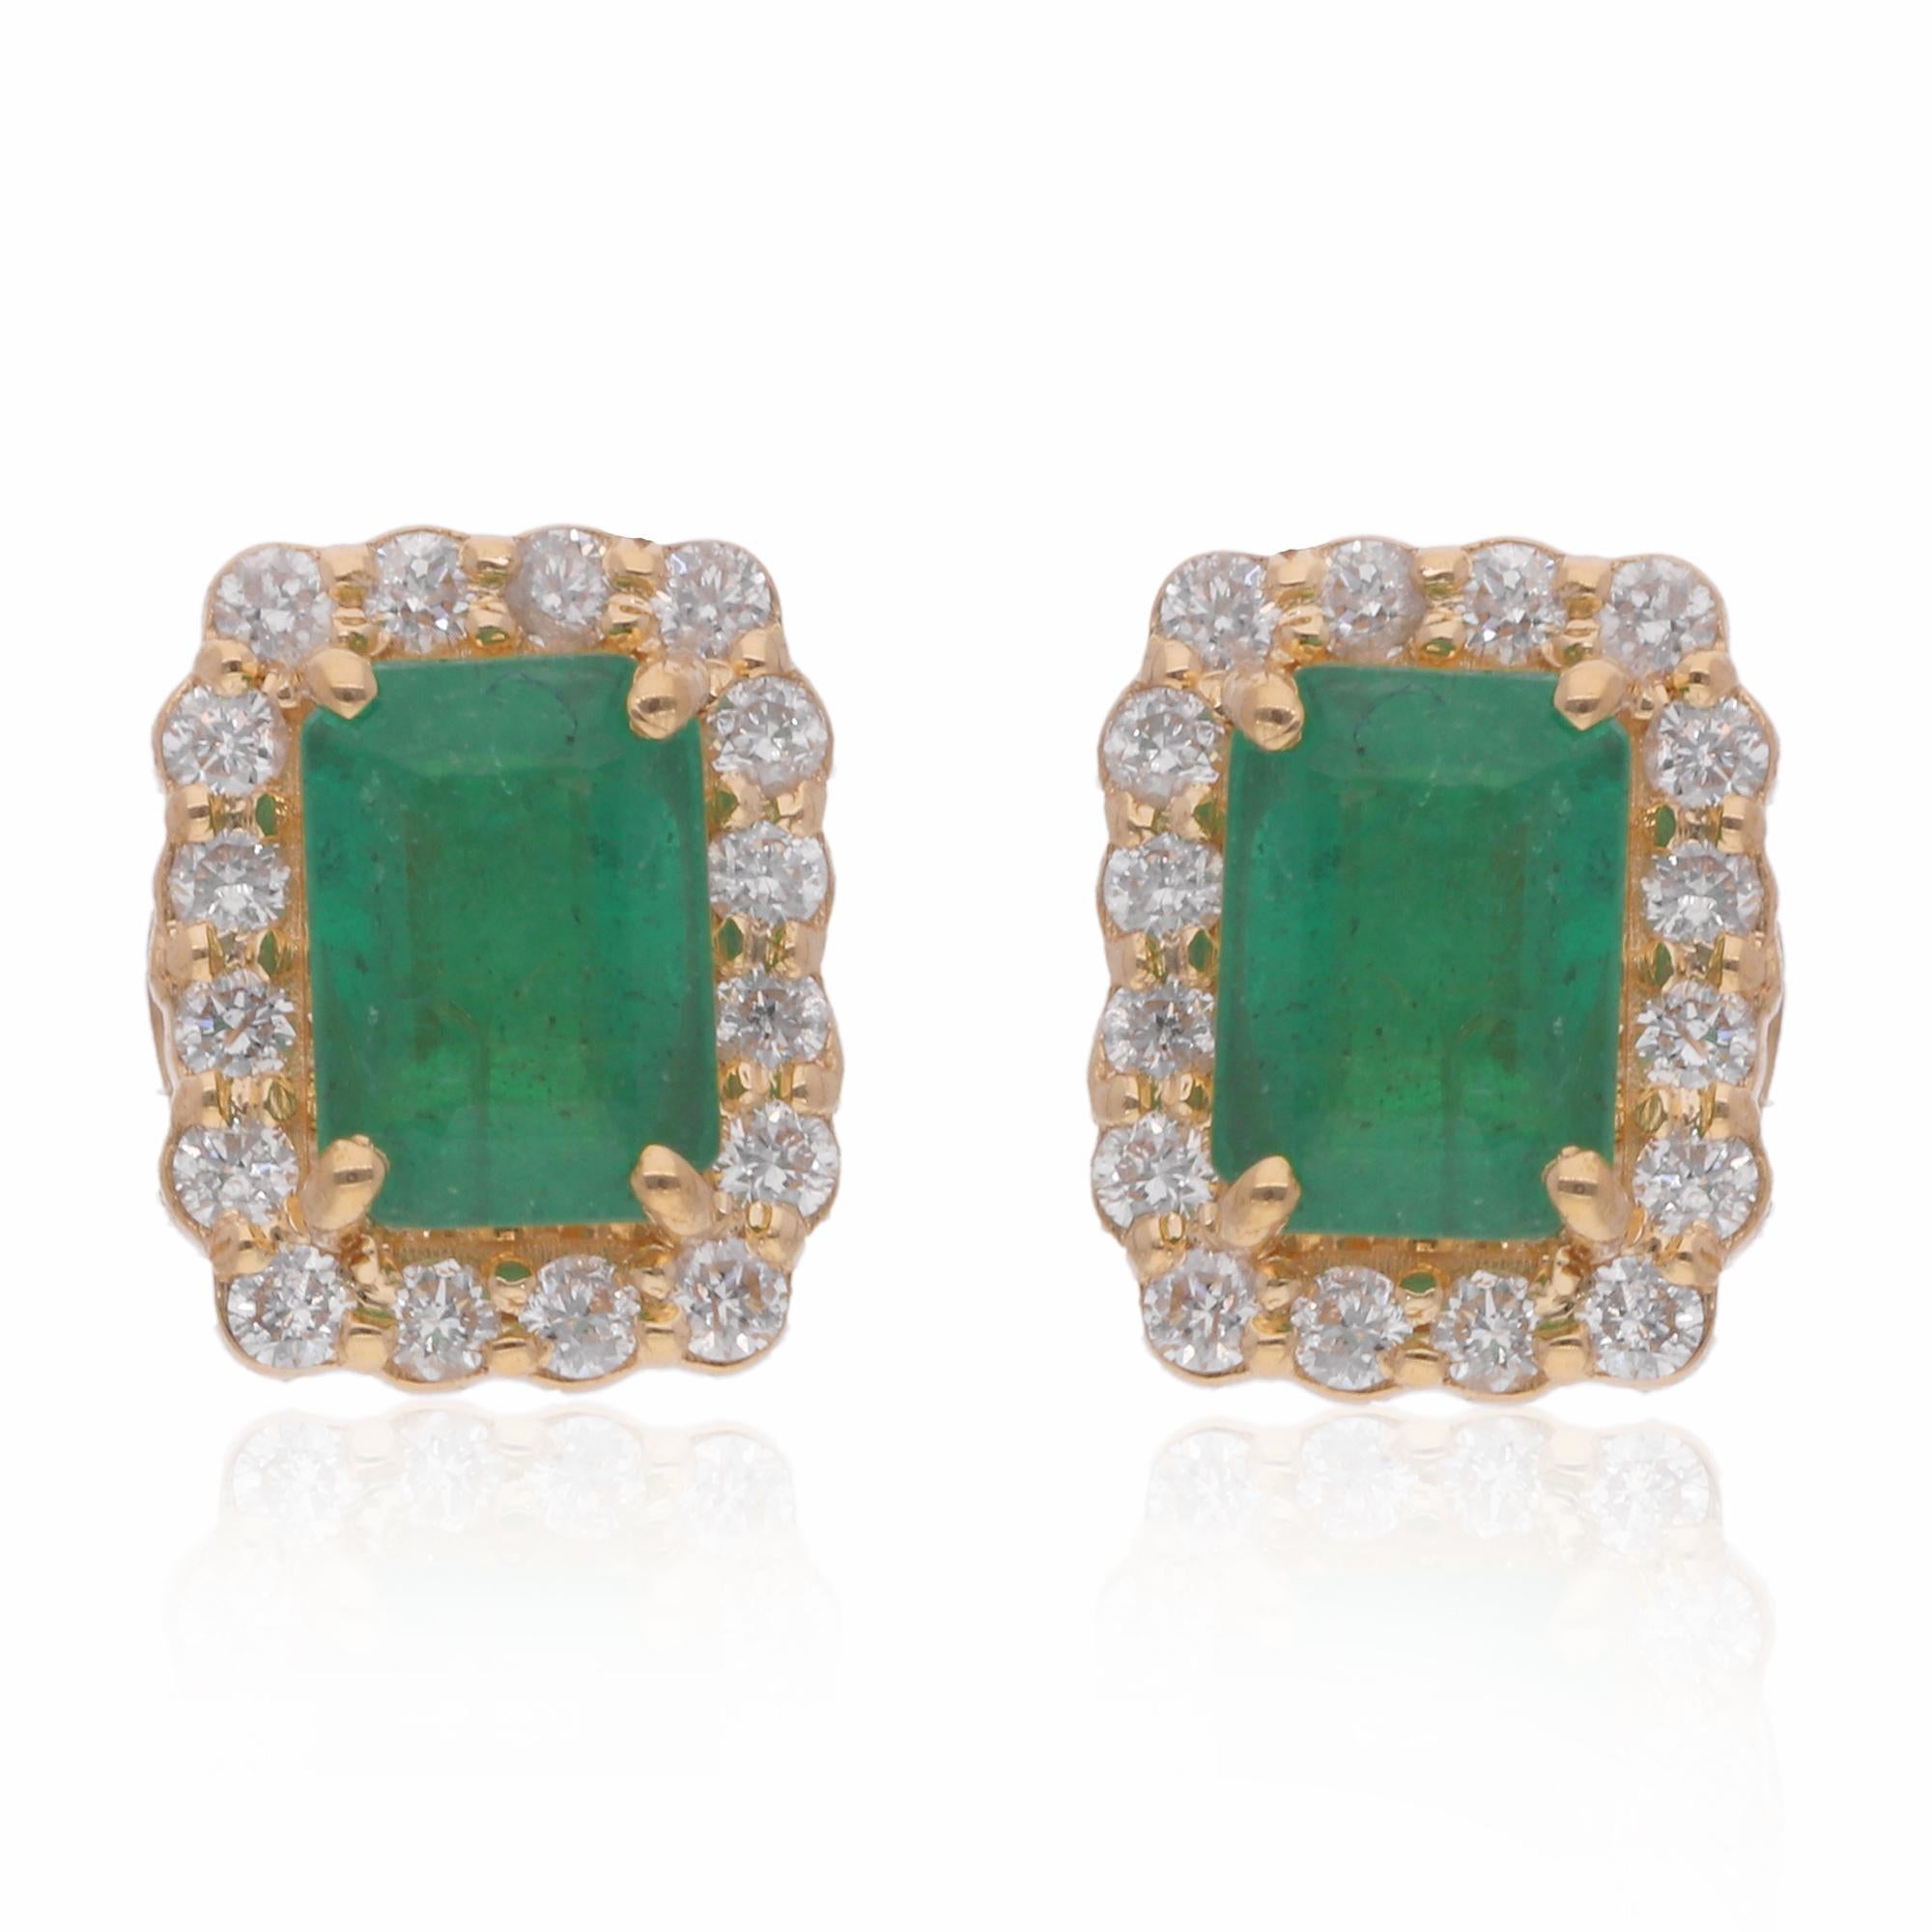 Crafted with precision and attention to detail, the earrings are fashioned in elegant 18 Karat White Gold, adding a timeless elegance to the design. The white gold setting provides a luminous backdrop for the emeralds and diamonds, creating a